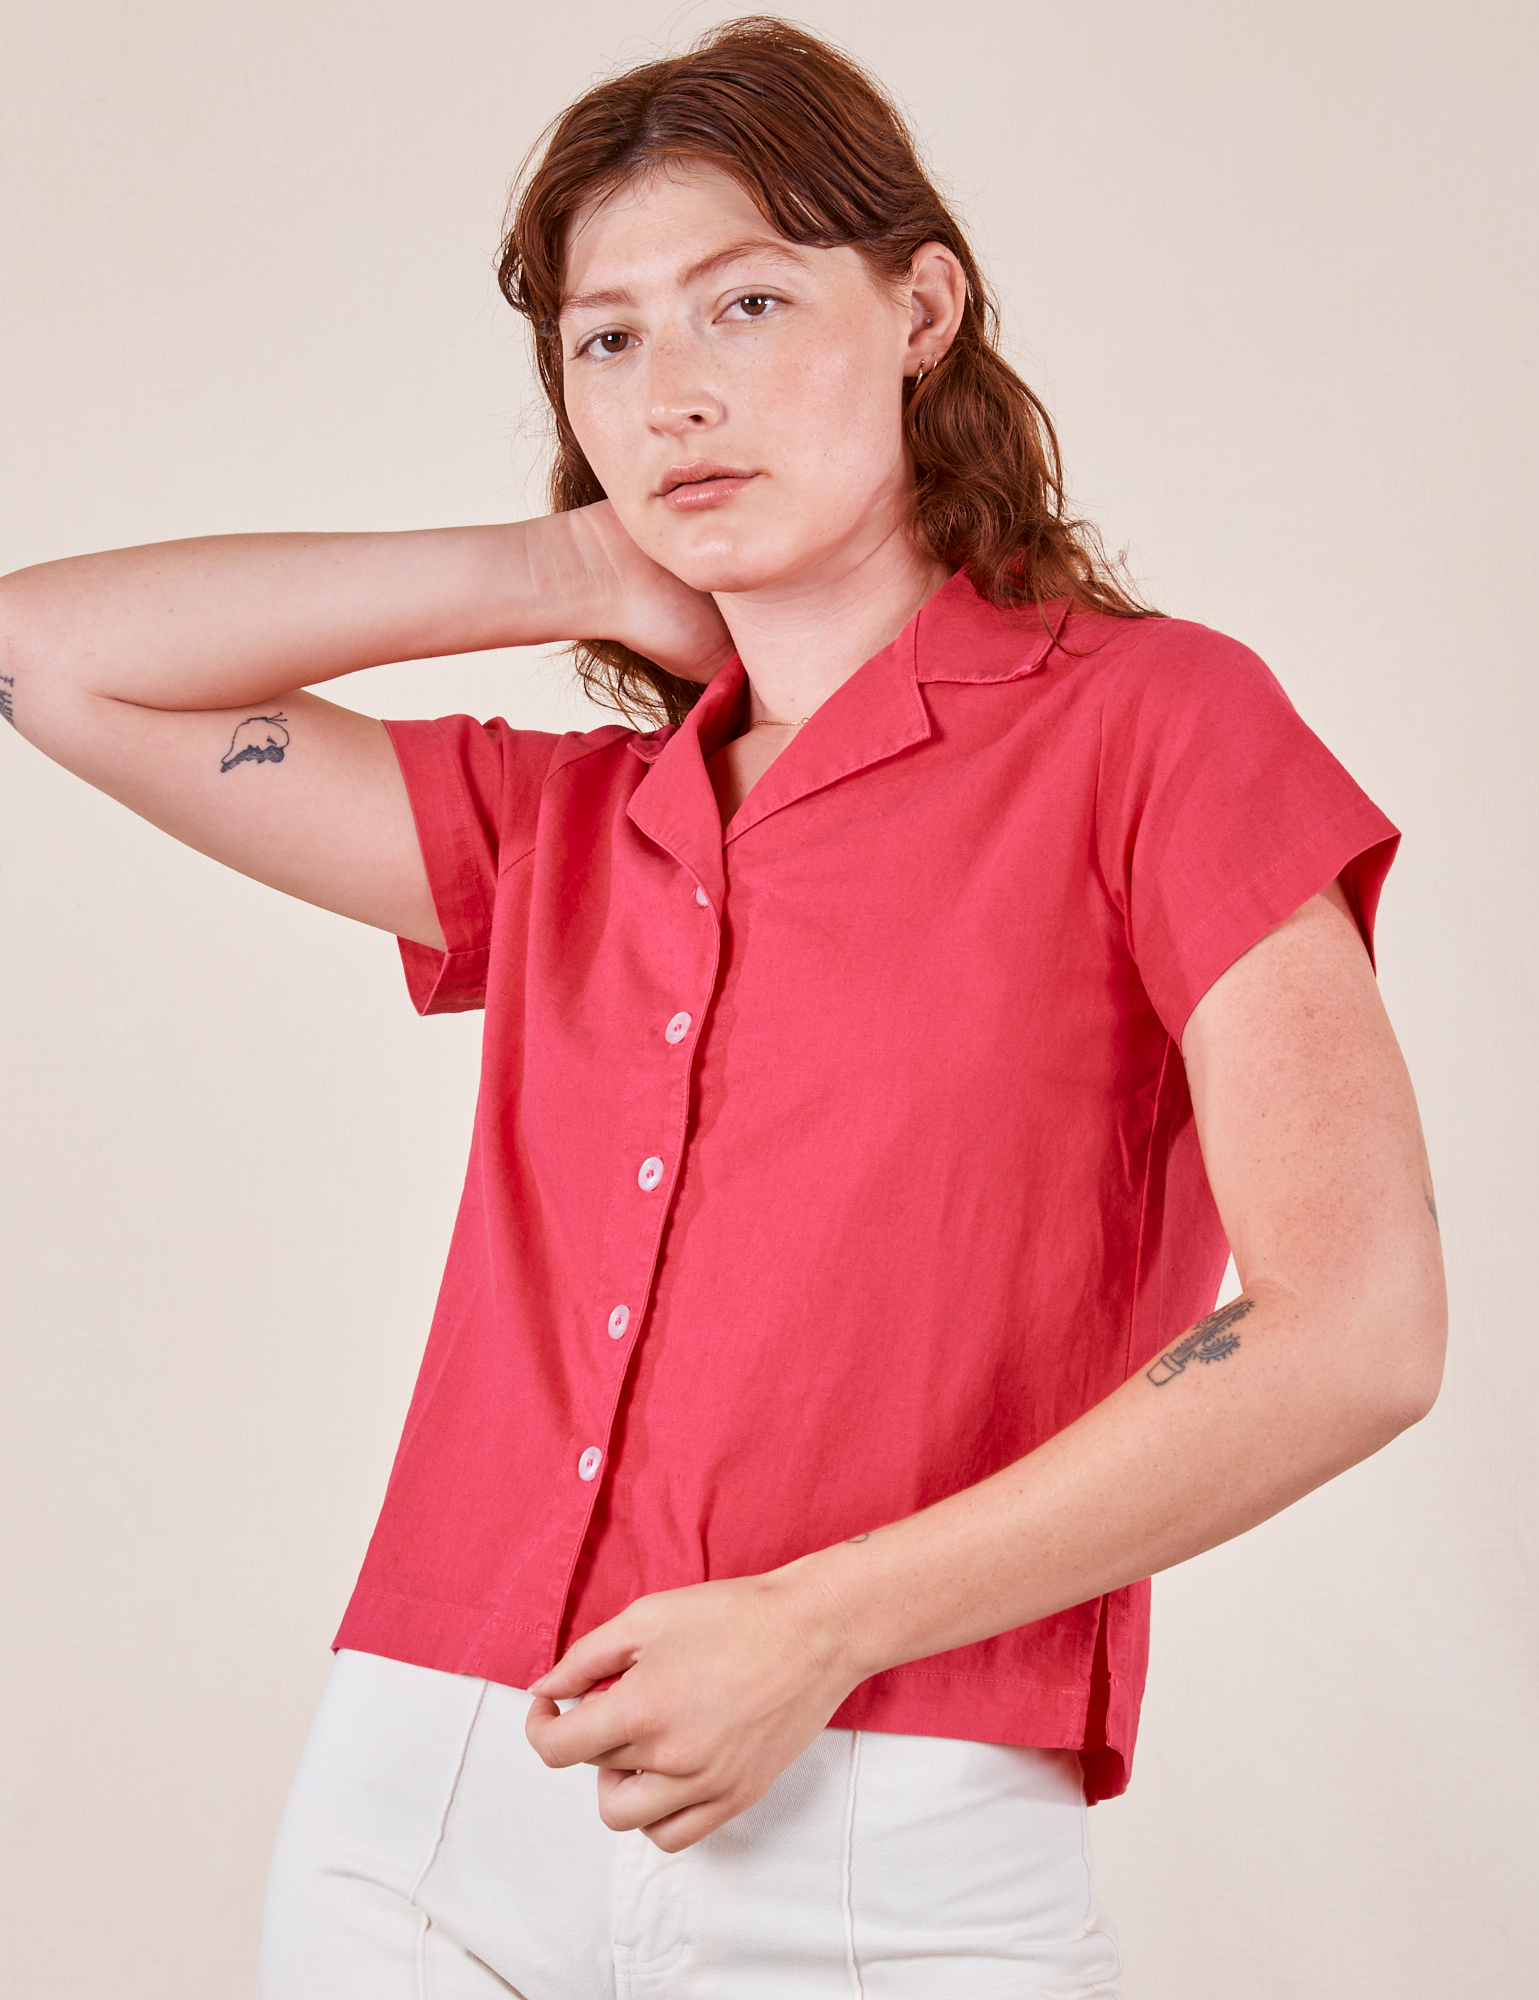 Alex is wearing Pantry Button-Up in Hot Pink